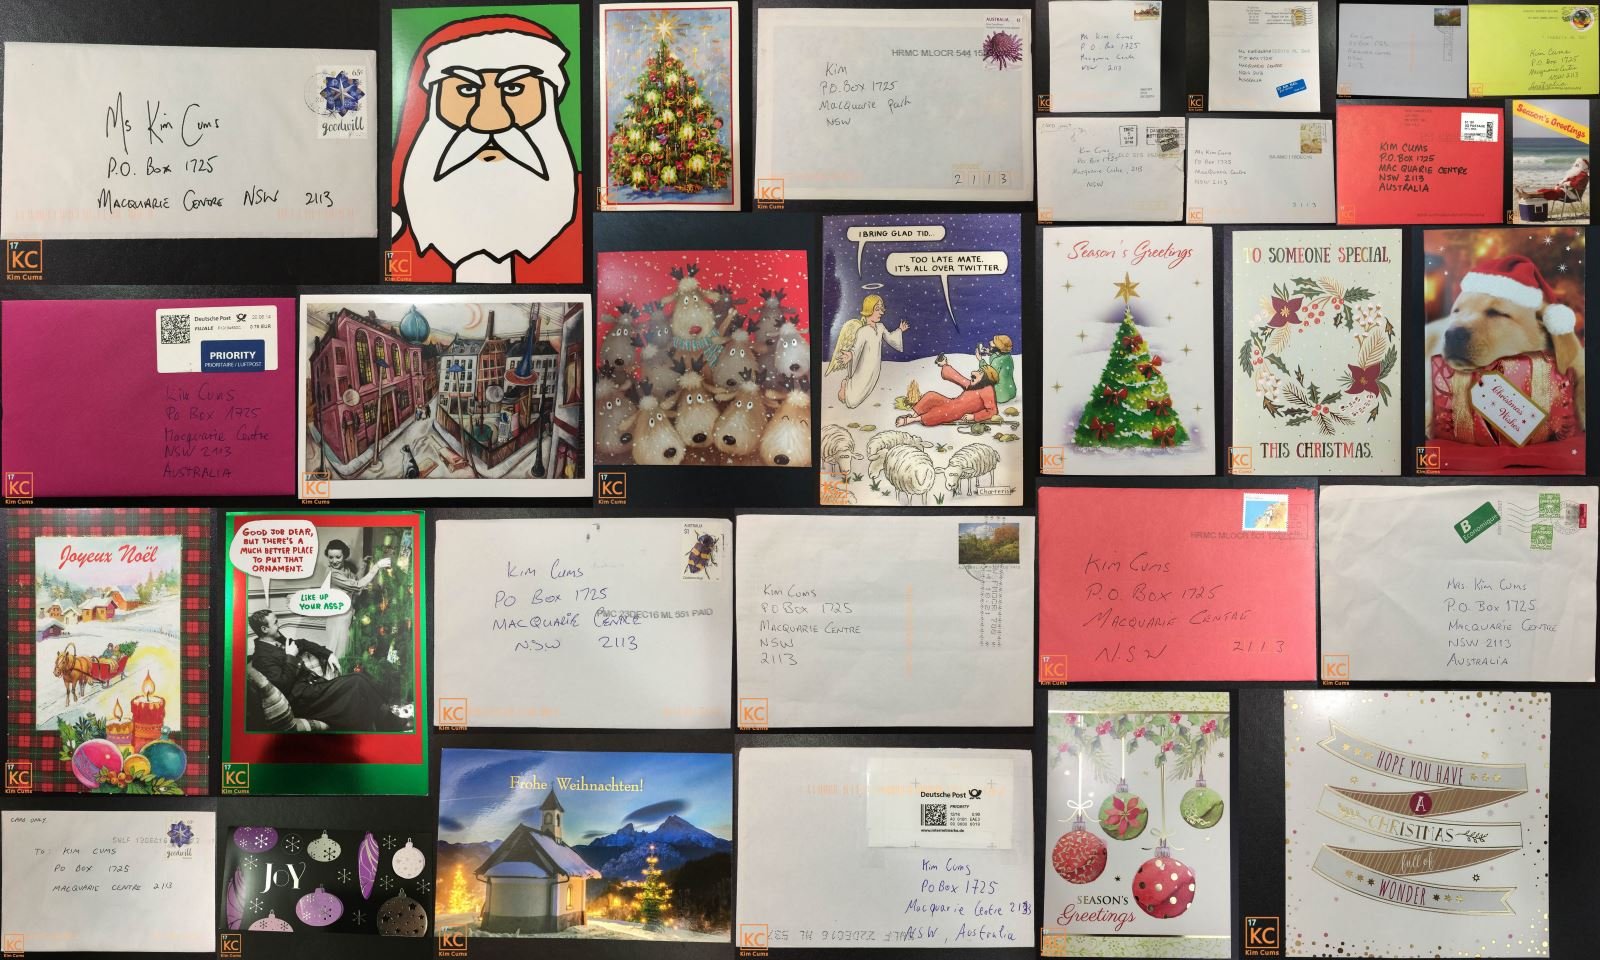 KimCumsクリスマス2016 Fanmail